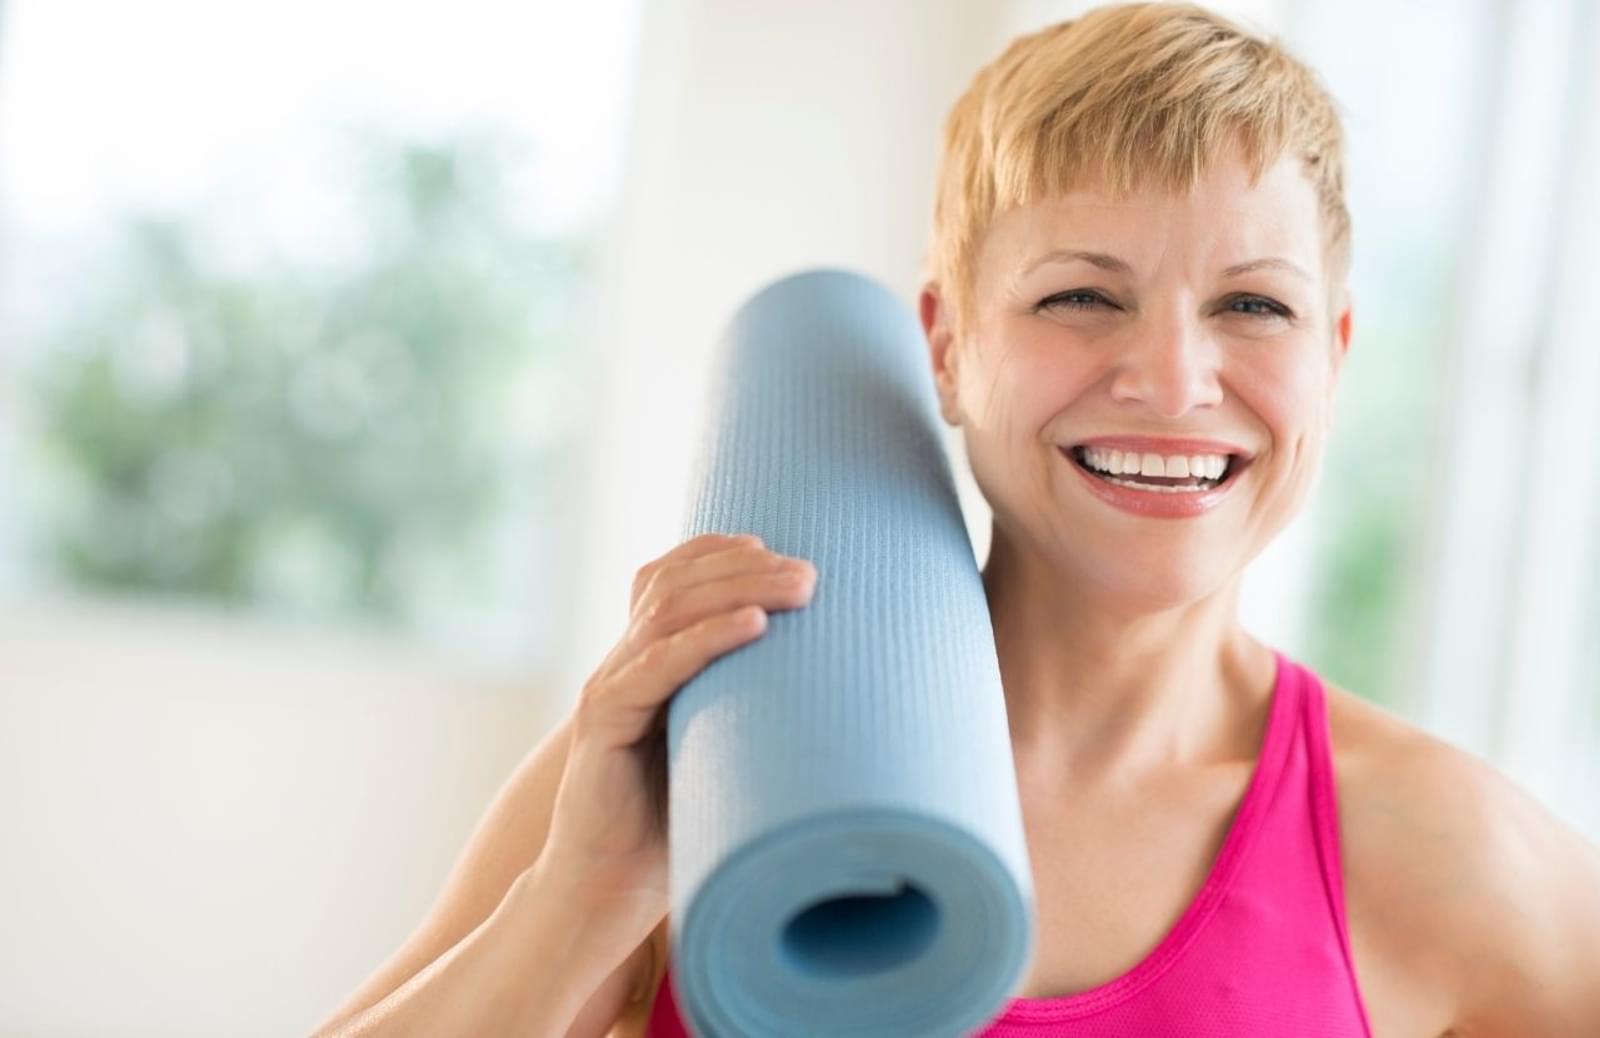 Smiling woman holding rolled-up yoga mat